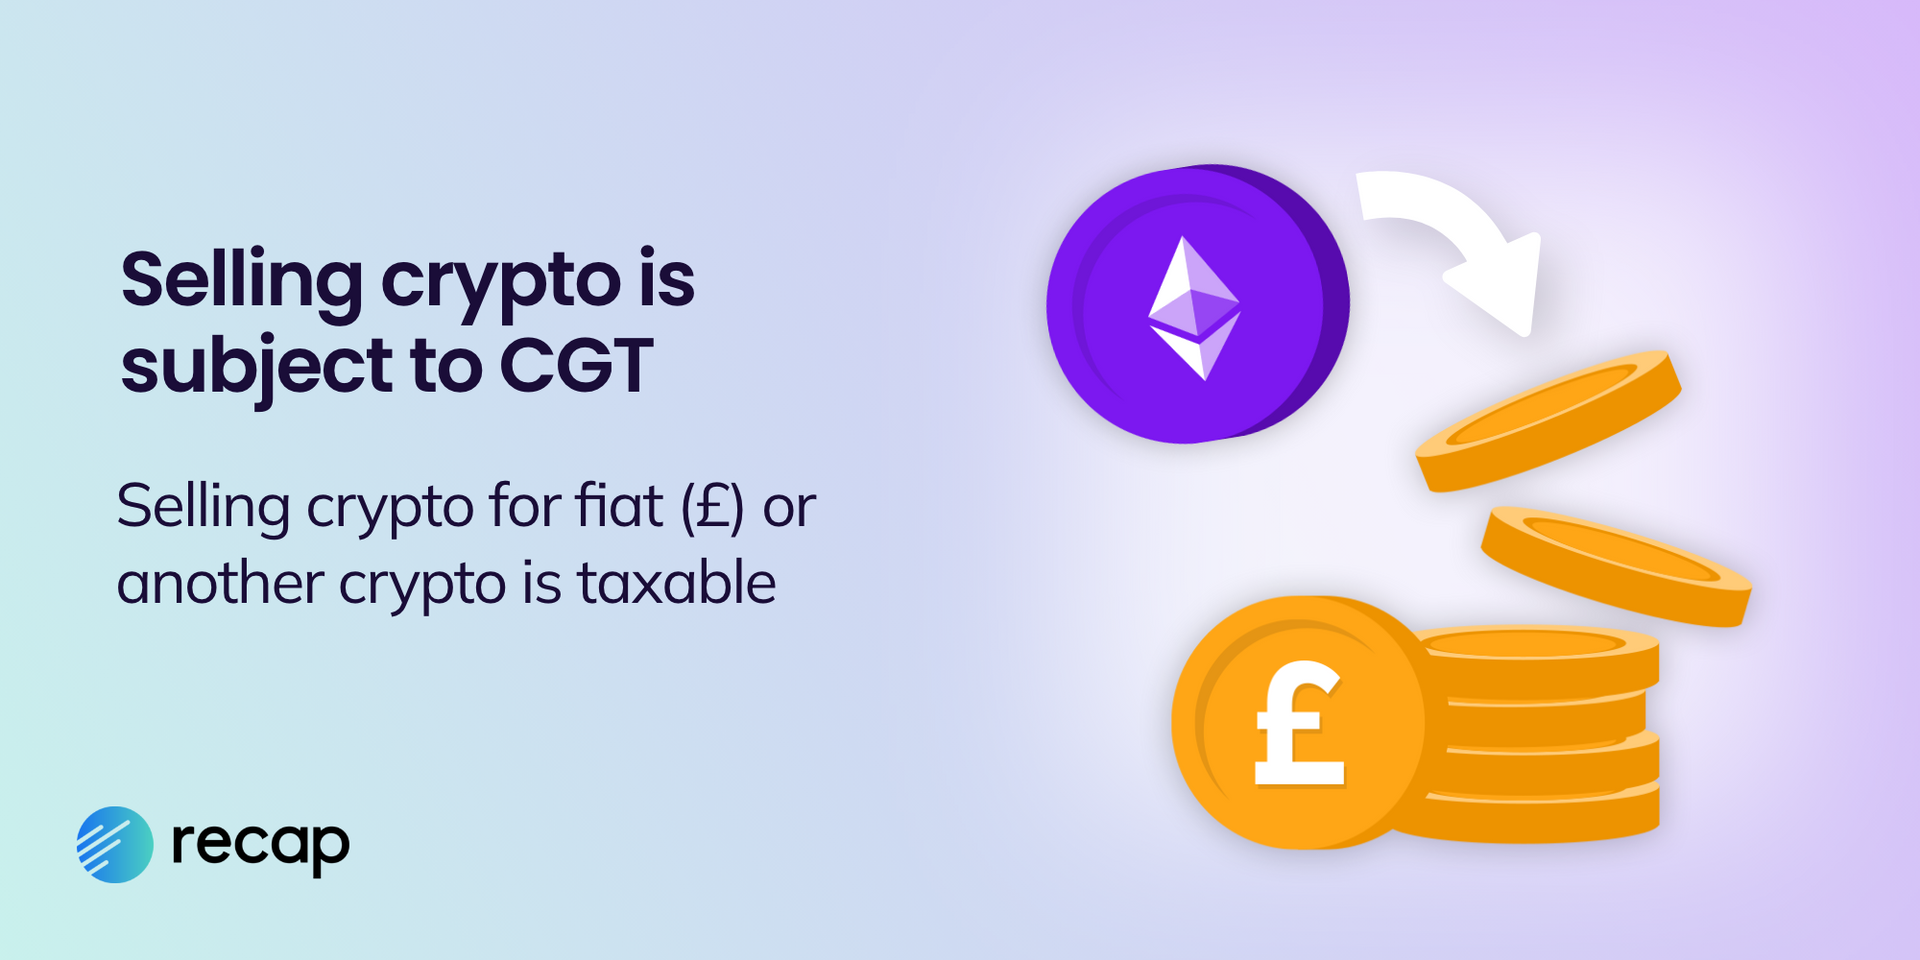 An infographic stating that selling crypto for fiat GBP or another crypto is subject to capital gains tax